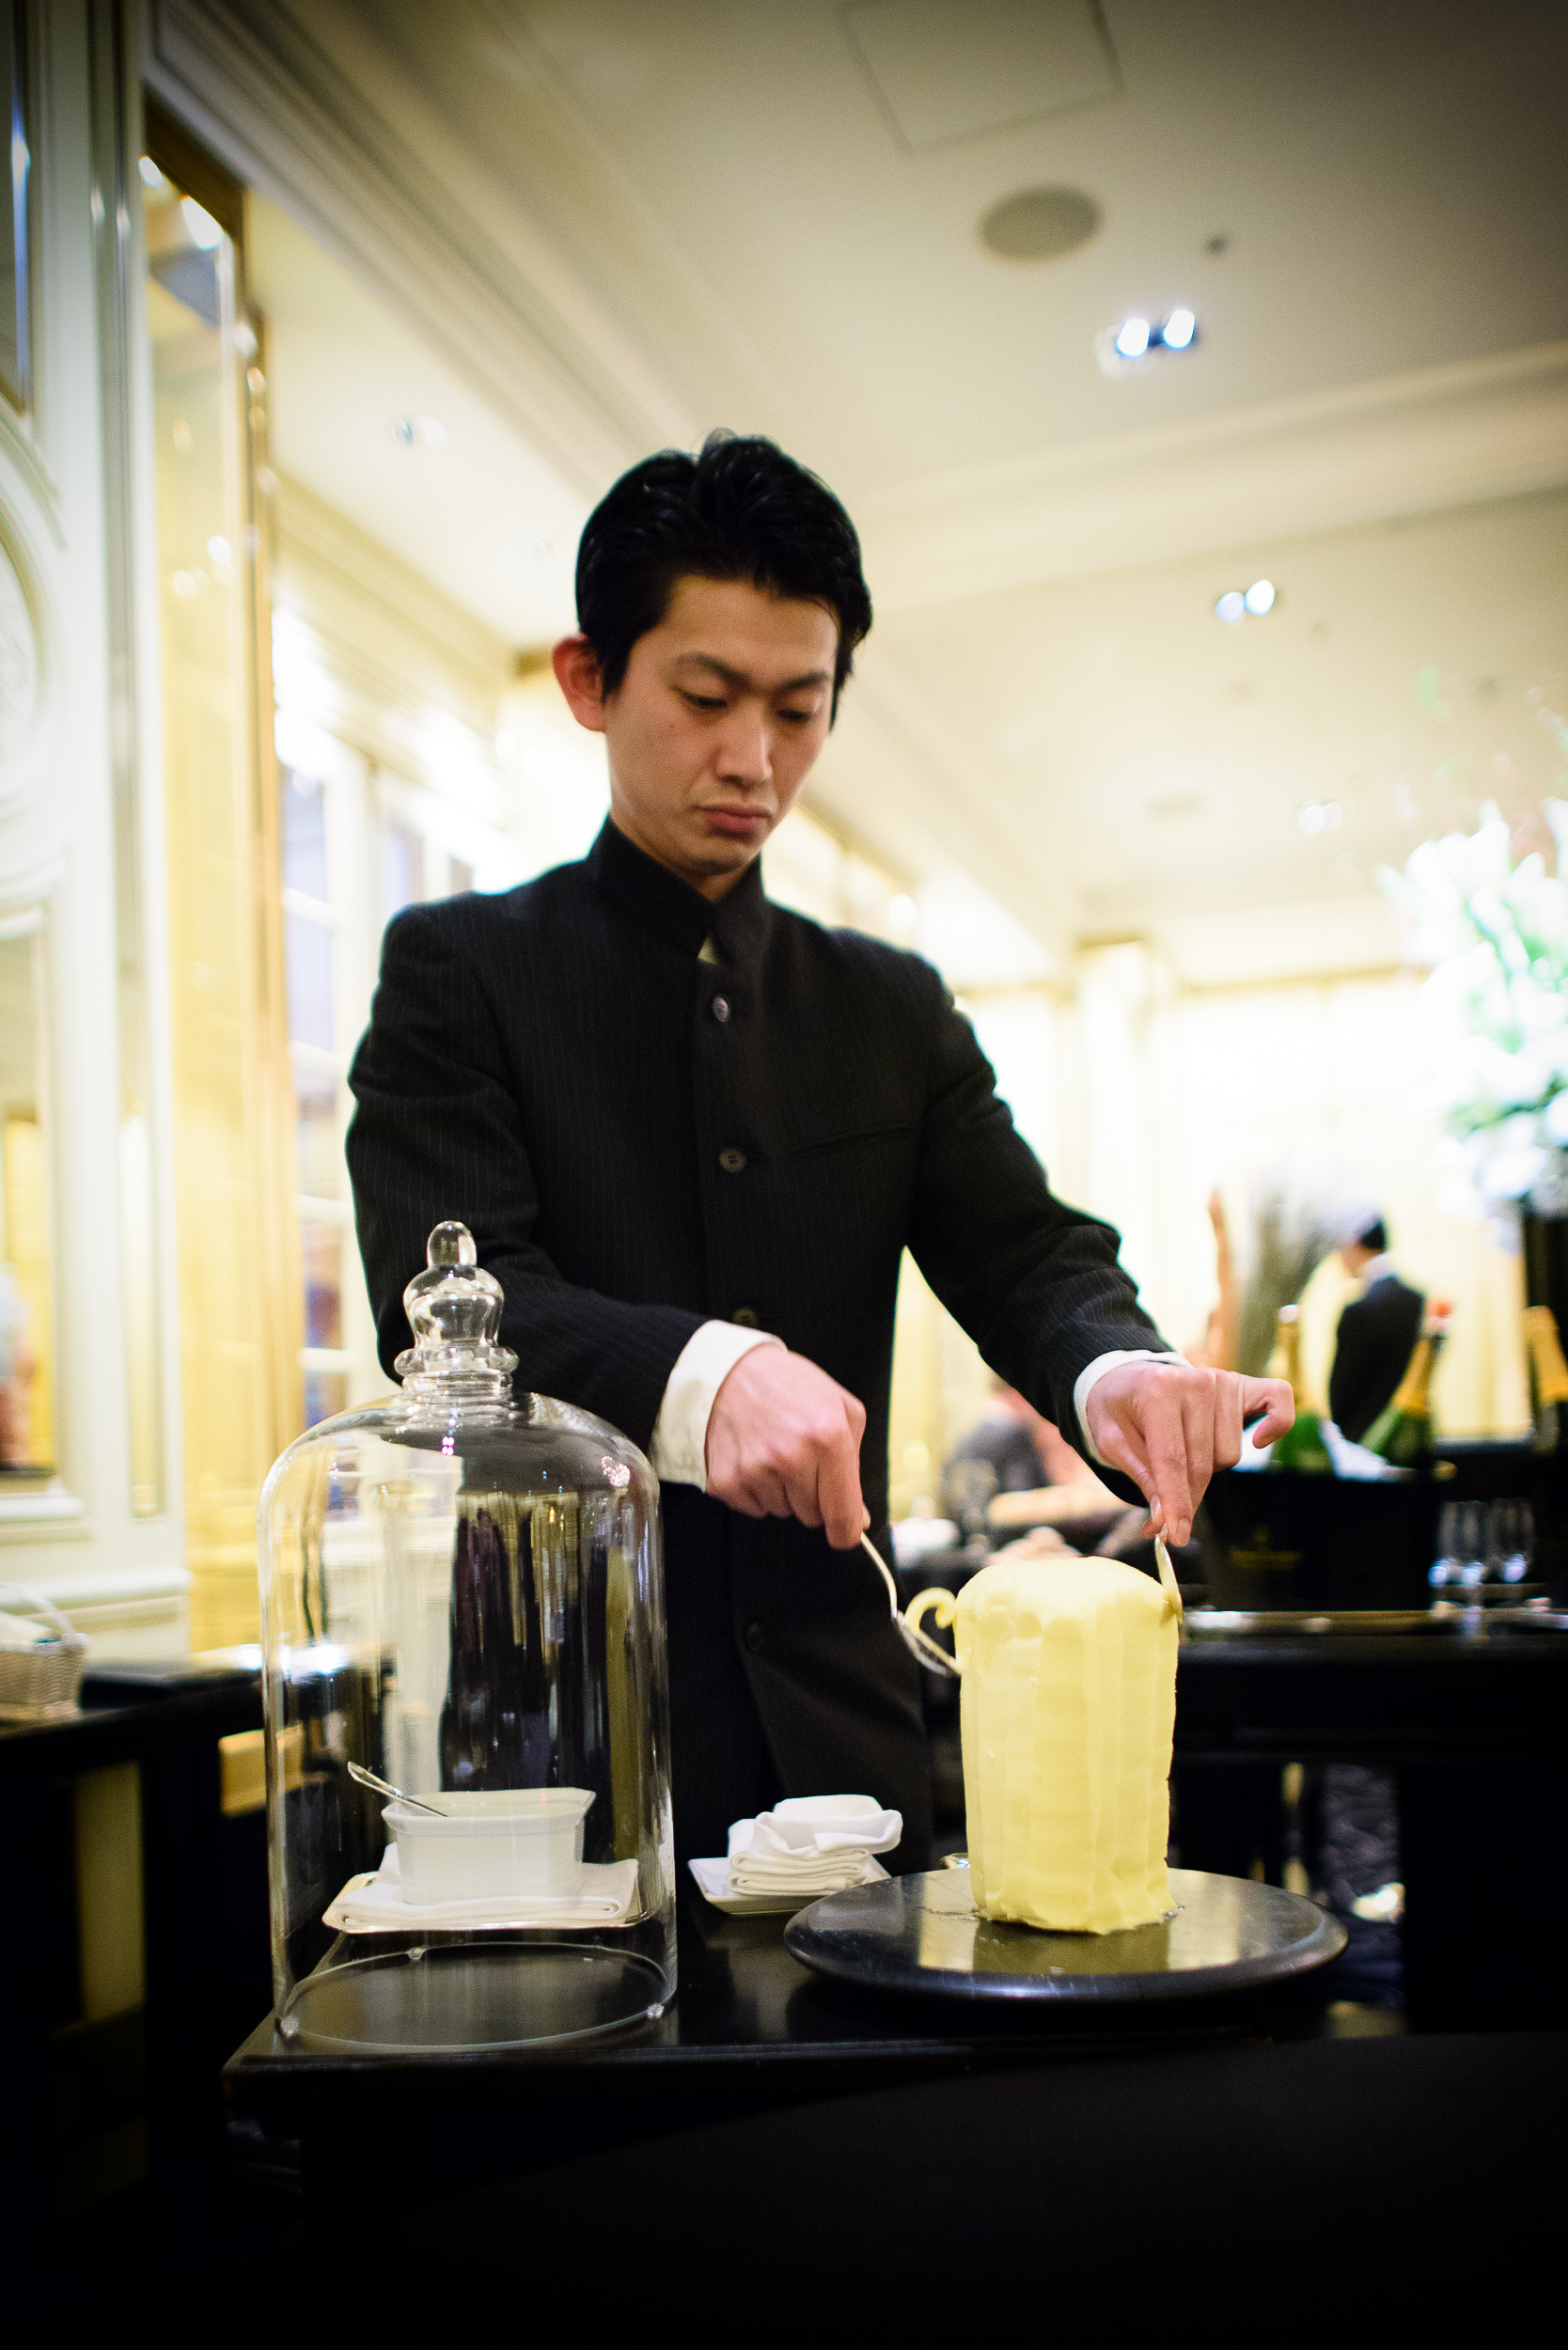 Table-side butter service